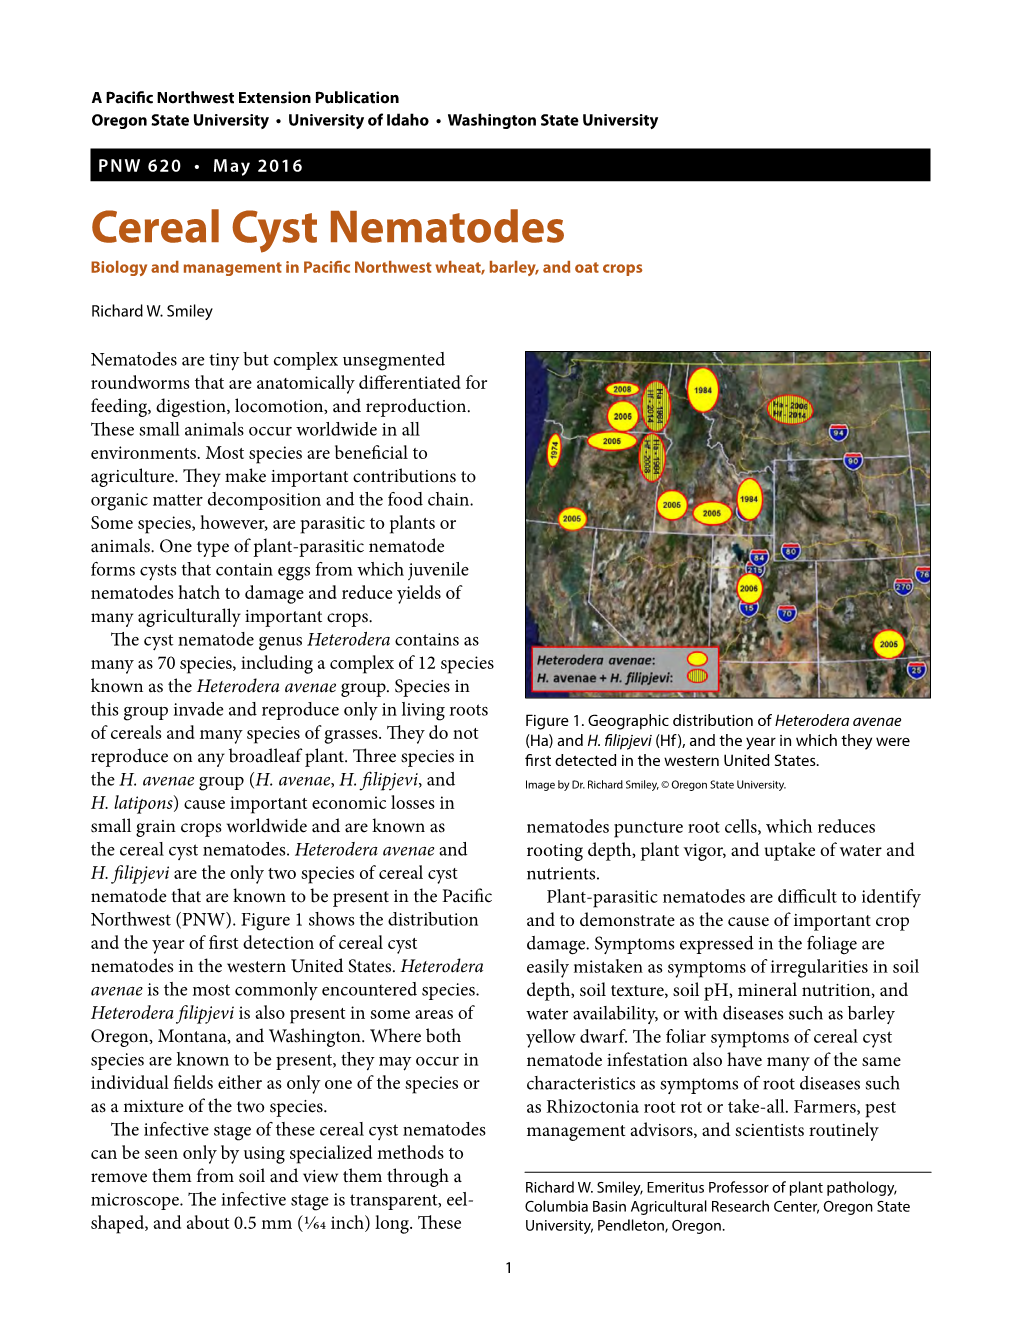 Cereal Cyst Nematodes Biology and Management in Pacific Northwest Wheat, Barley, and Oat Crops